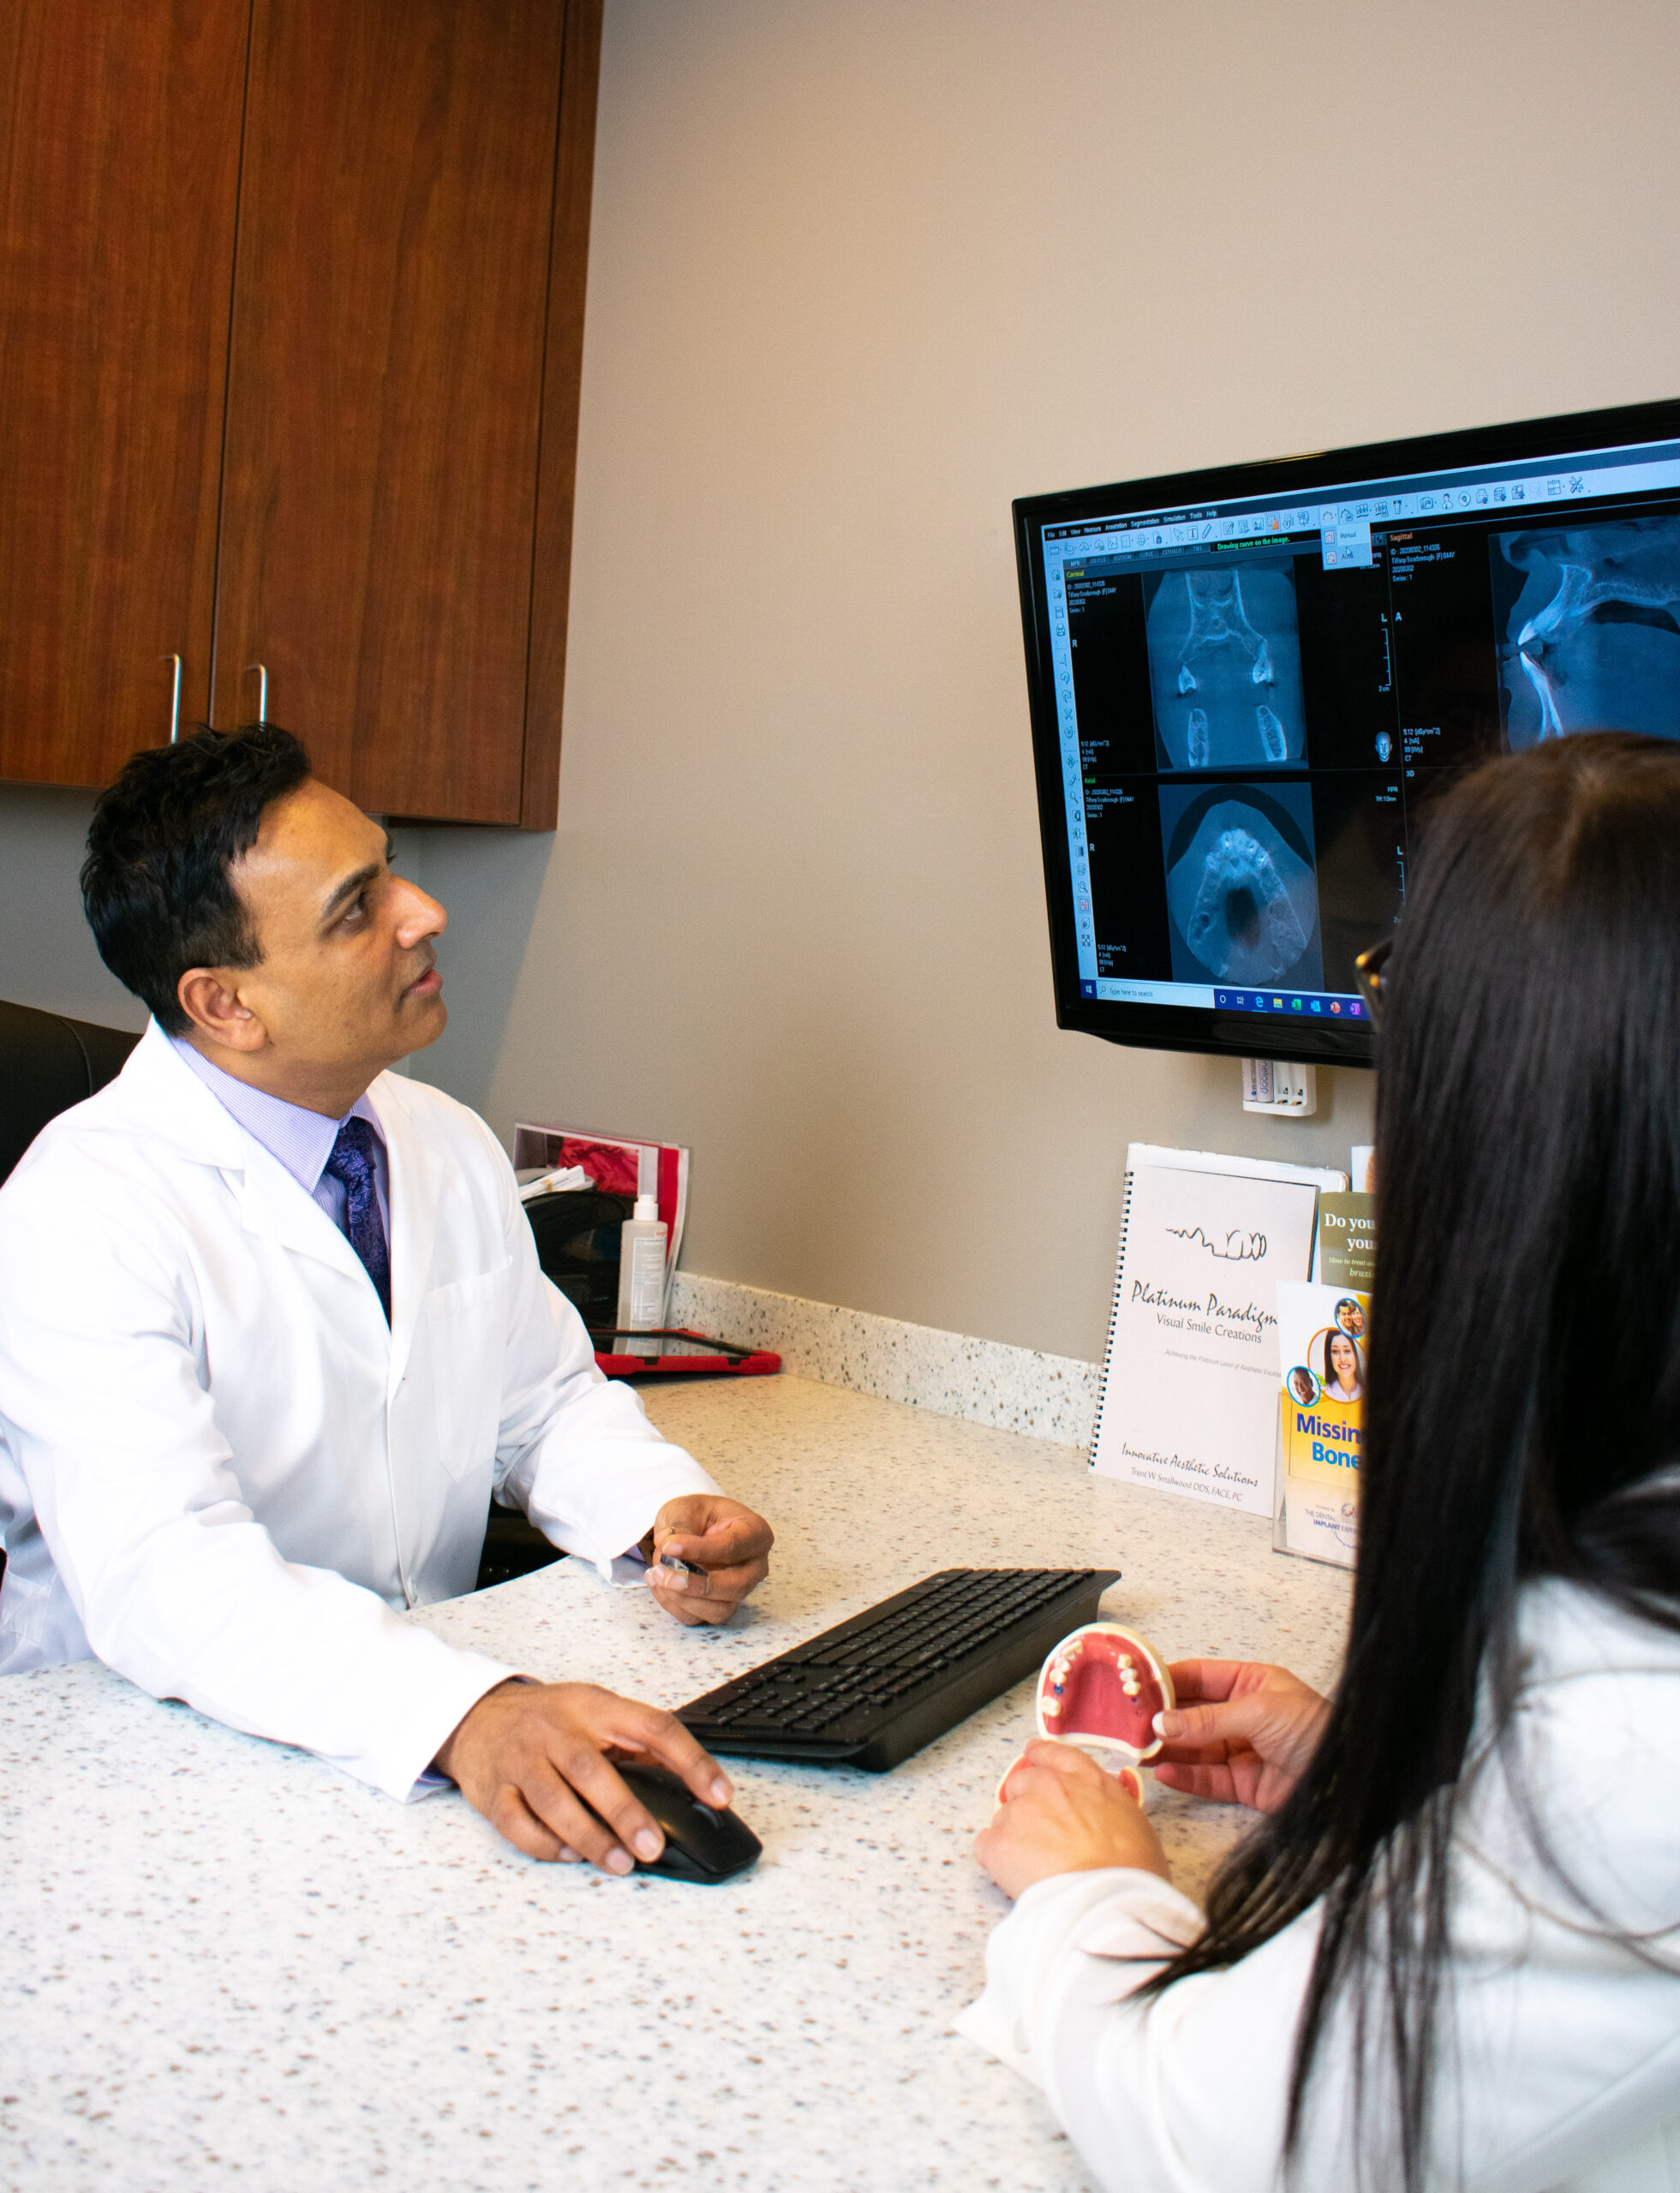 Patient results being shown on a screen in Dr. Patel's office